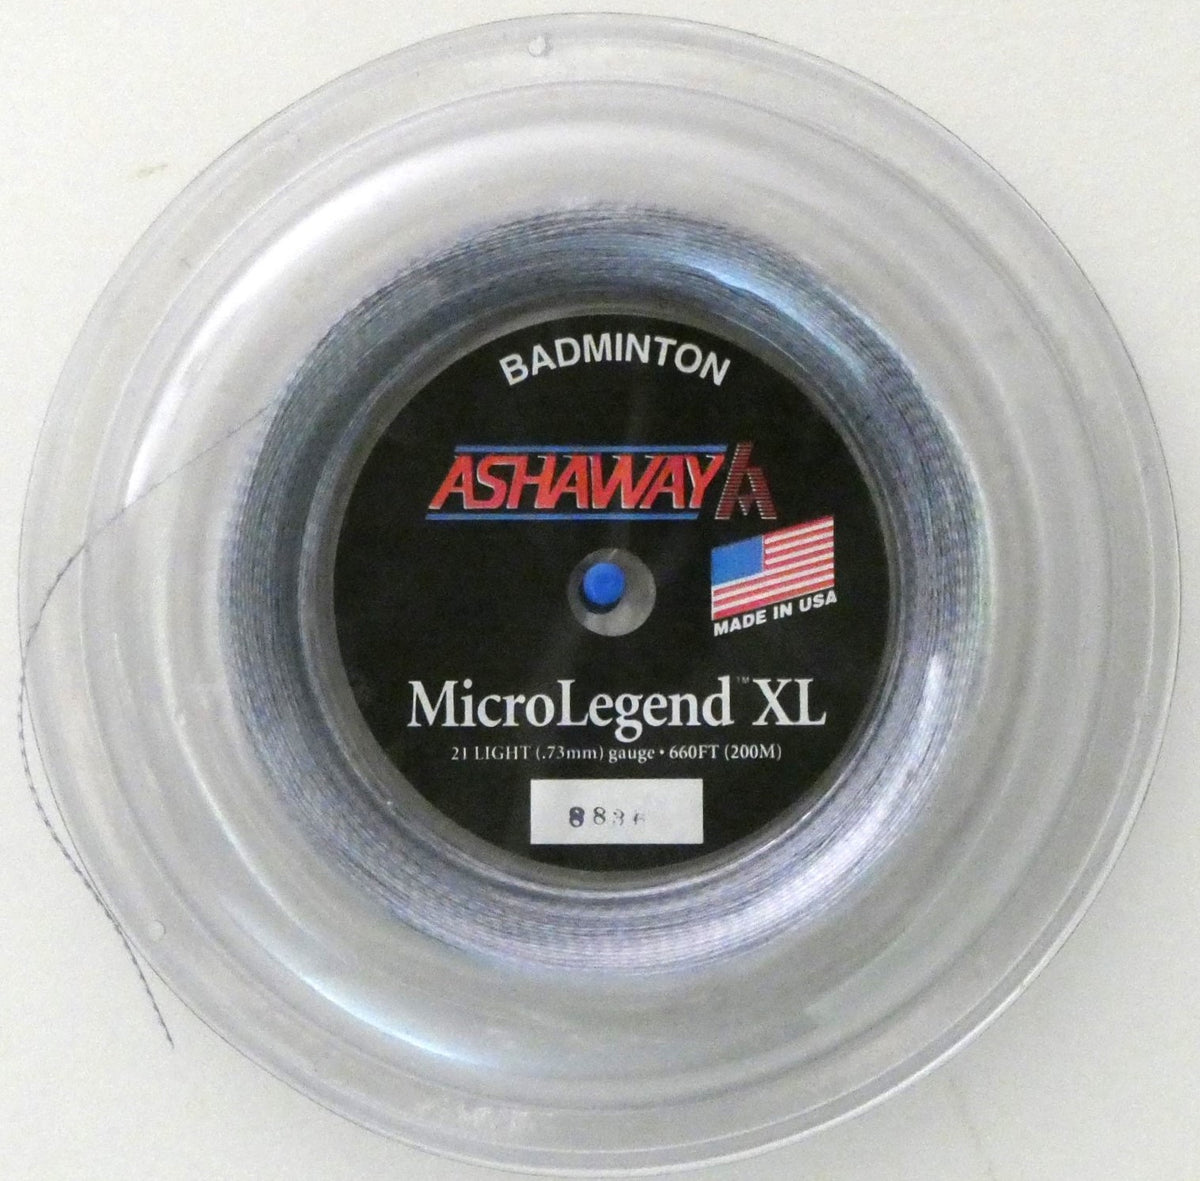 Ashaway MicroLegend XL Badminton String, Gray with Blue Spiral, 200 M REEL